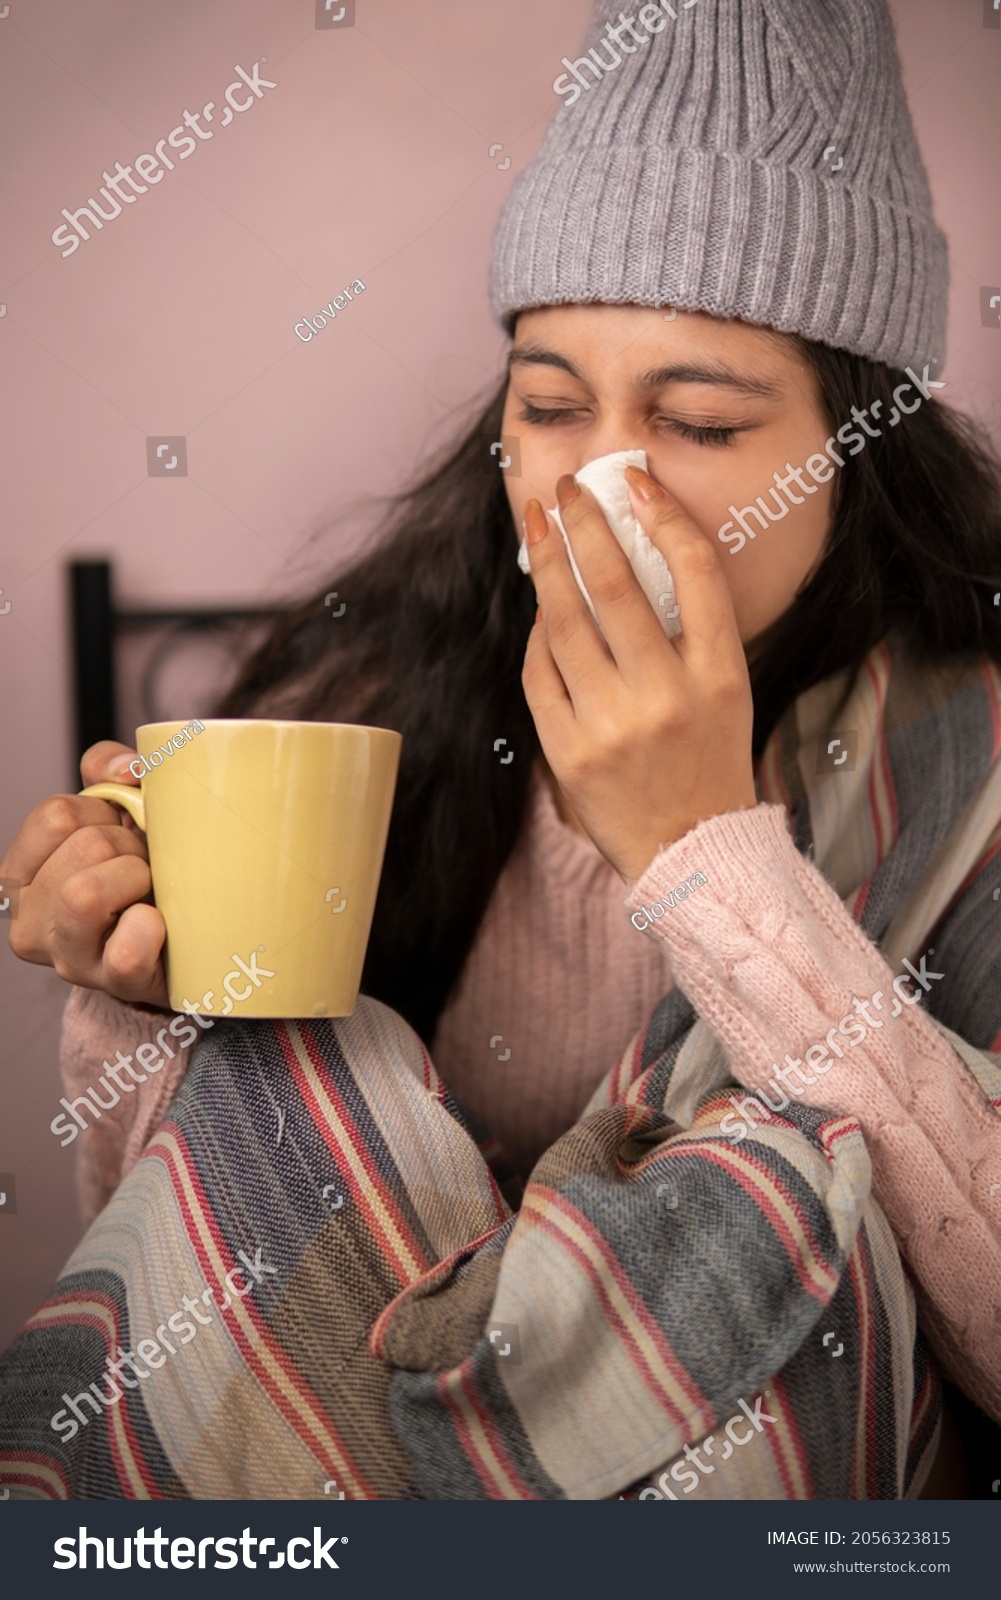 indoor image of a young woman getting sick with flu and cold and using a tissue paper to sneeze and blowing her nose while holding a coffee mug at home in winters. She is wearing warm clothes. #2056323815